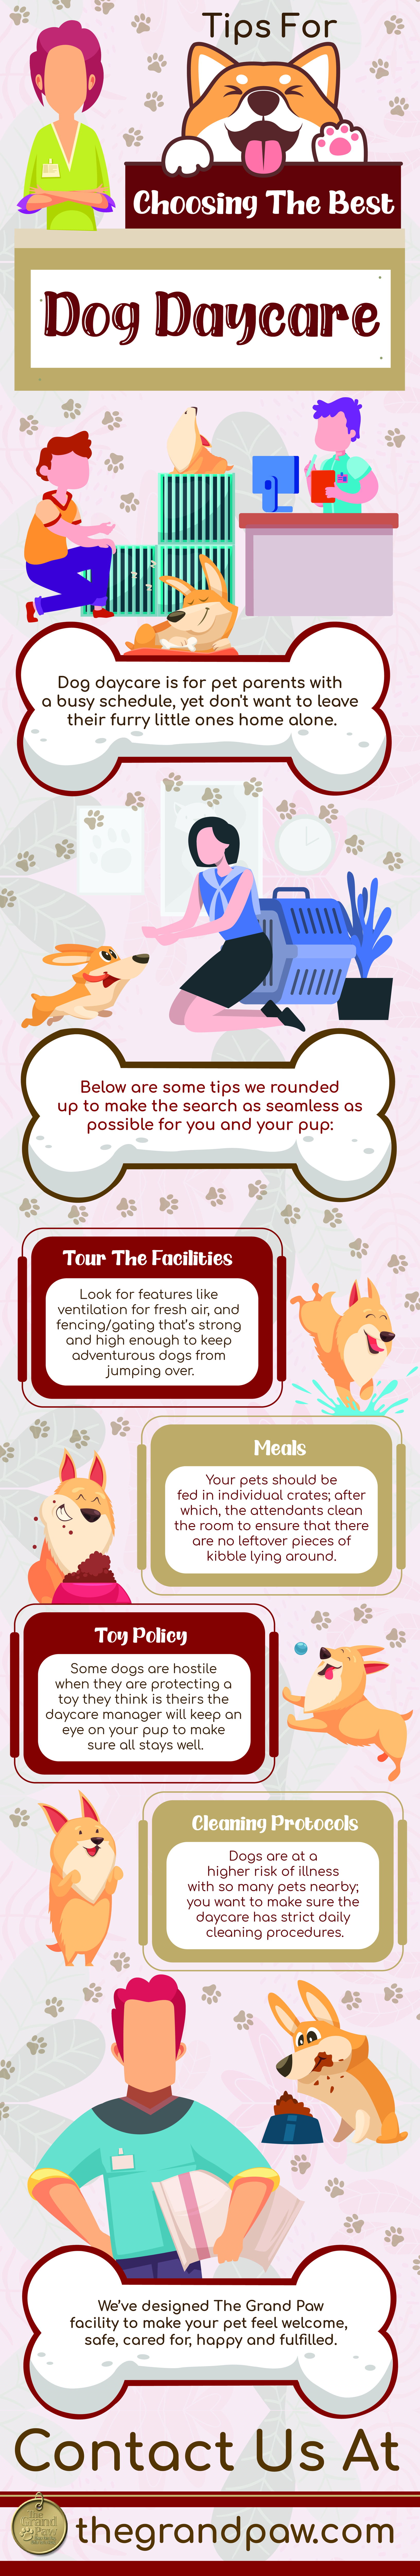 tips-for-choosing-best-dog-daycare